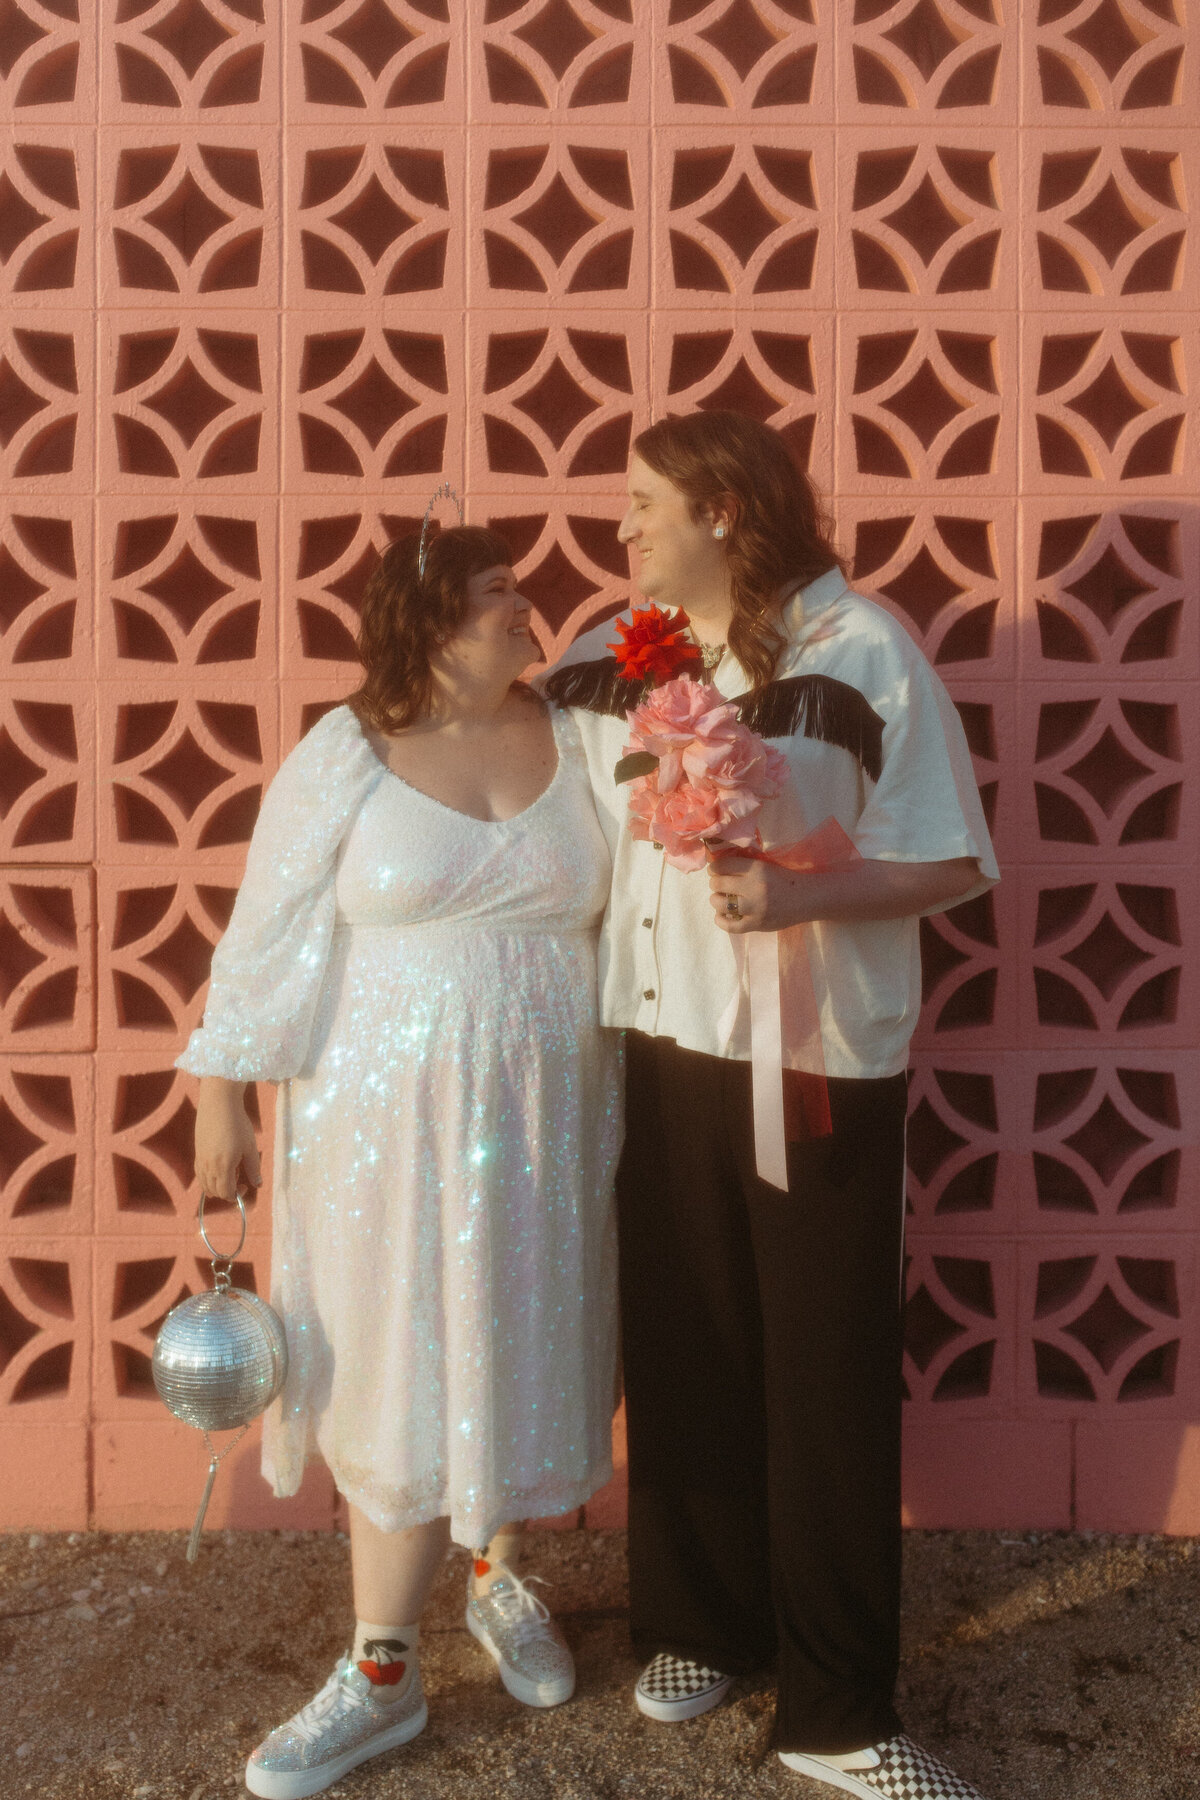 Two people in casual wedding attire exchanging a loving glance in front of a pink geometric wall, one holding a disco ball purse and a bouquet of red flowers